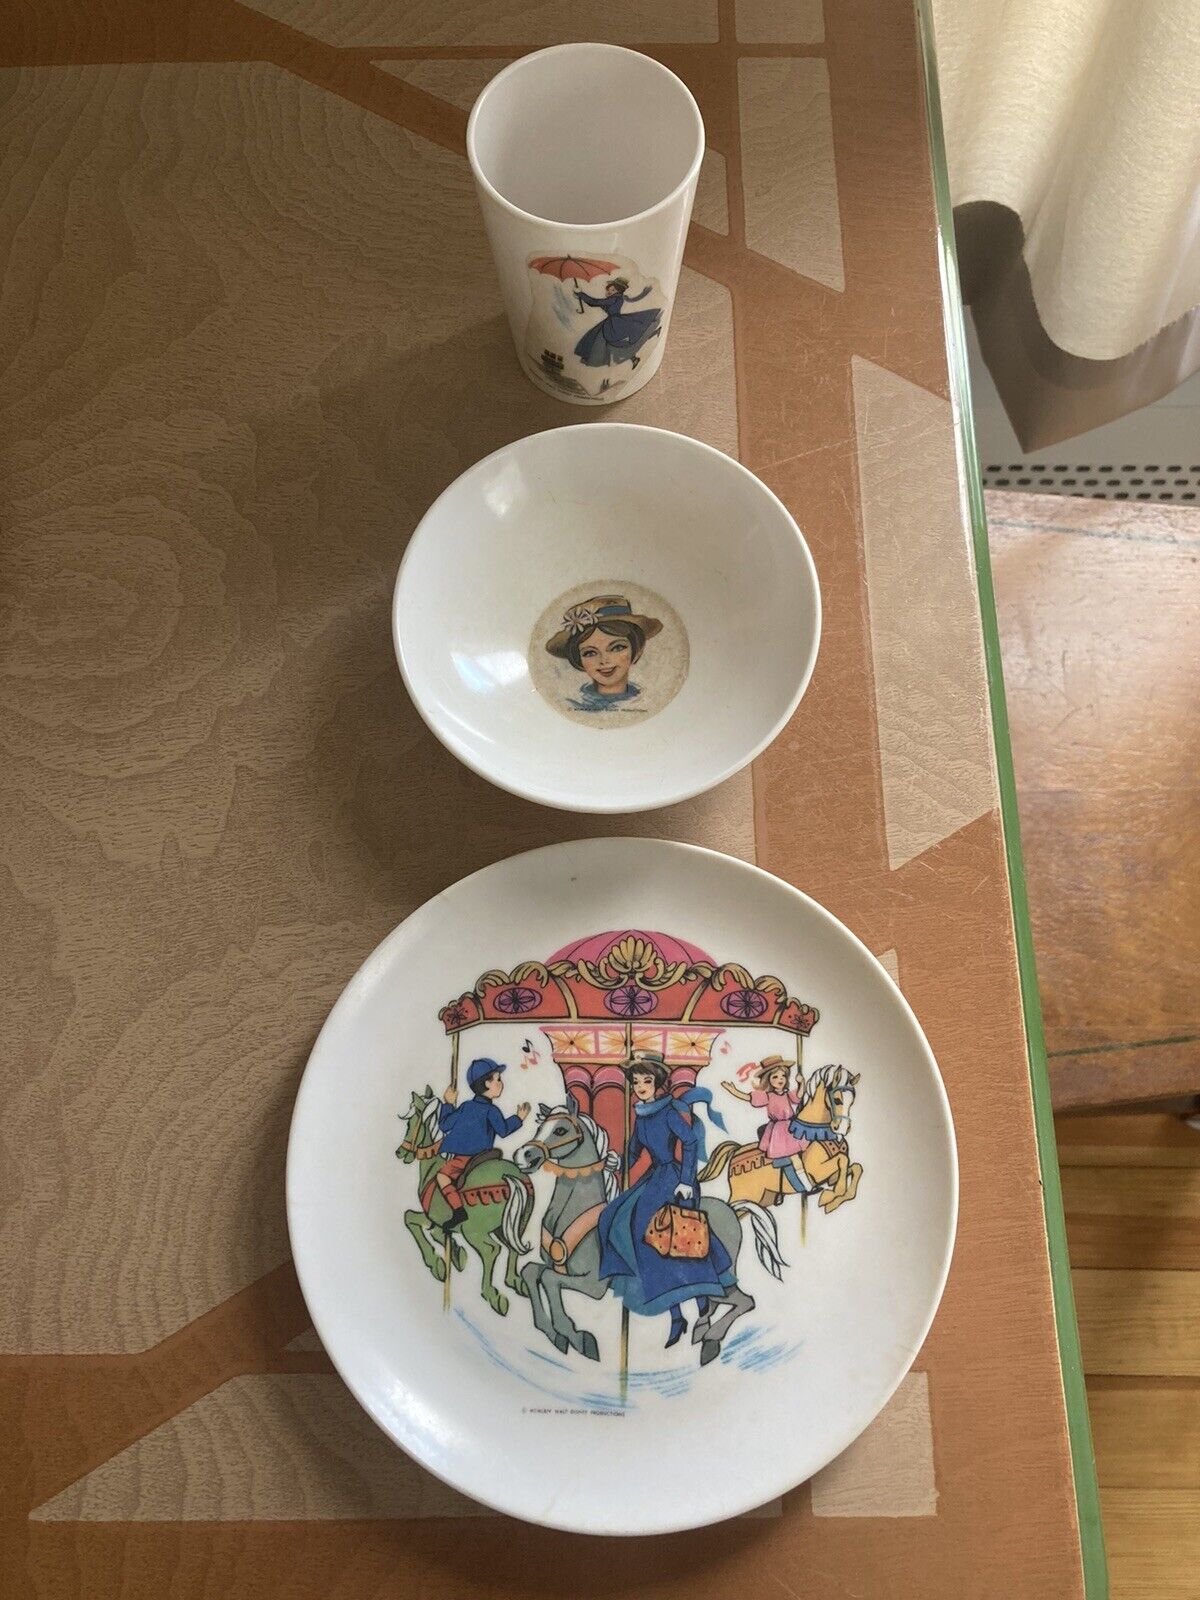 Mary Poppins Vintage 1964  childrens plastic (melmac) bowl, plate and cup set